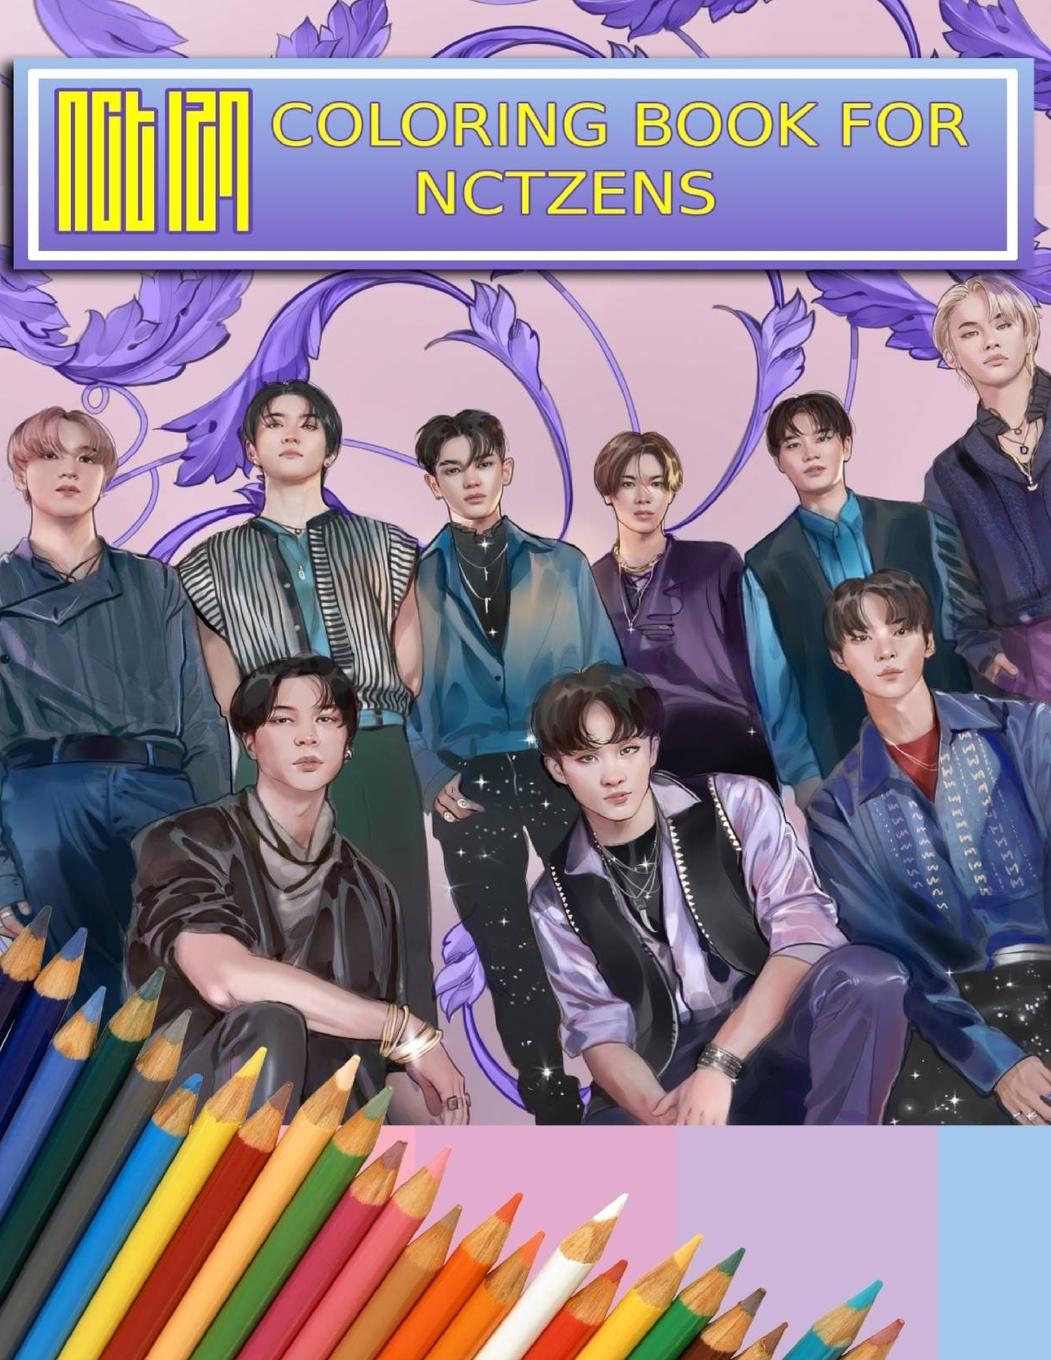 Book NCT Coloring Book For NCTzens 